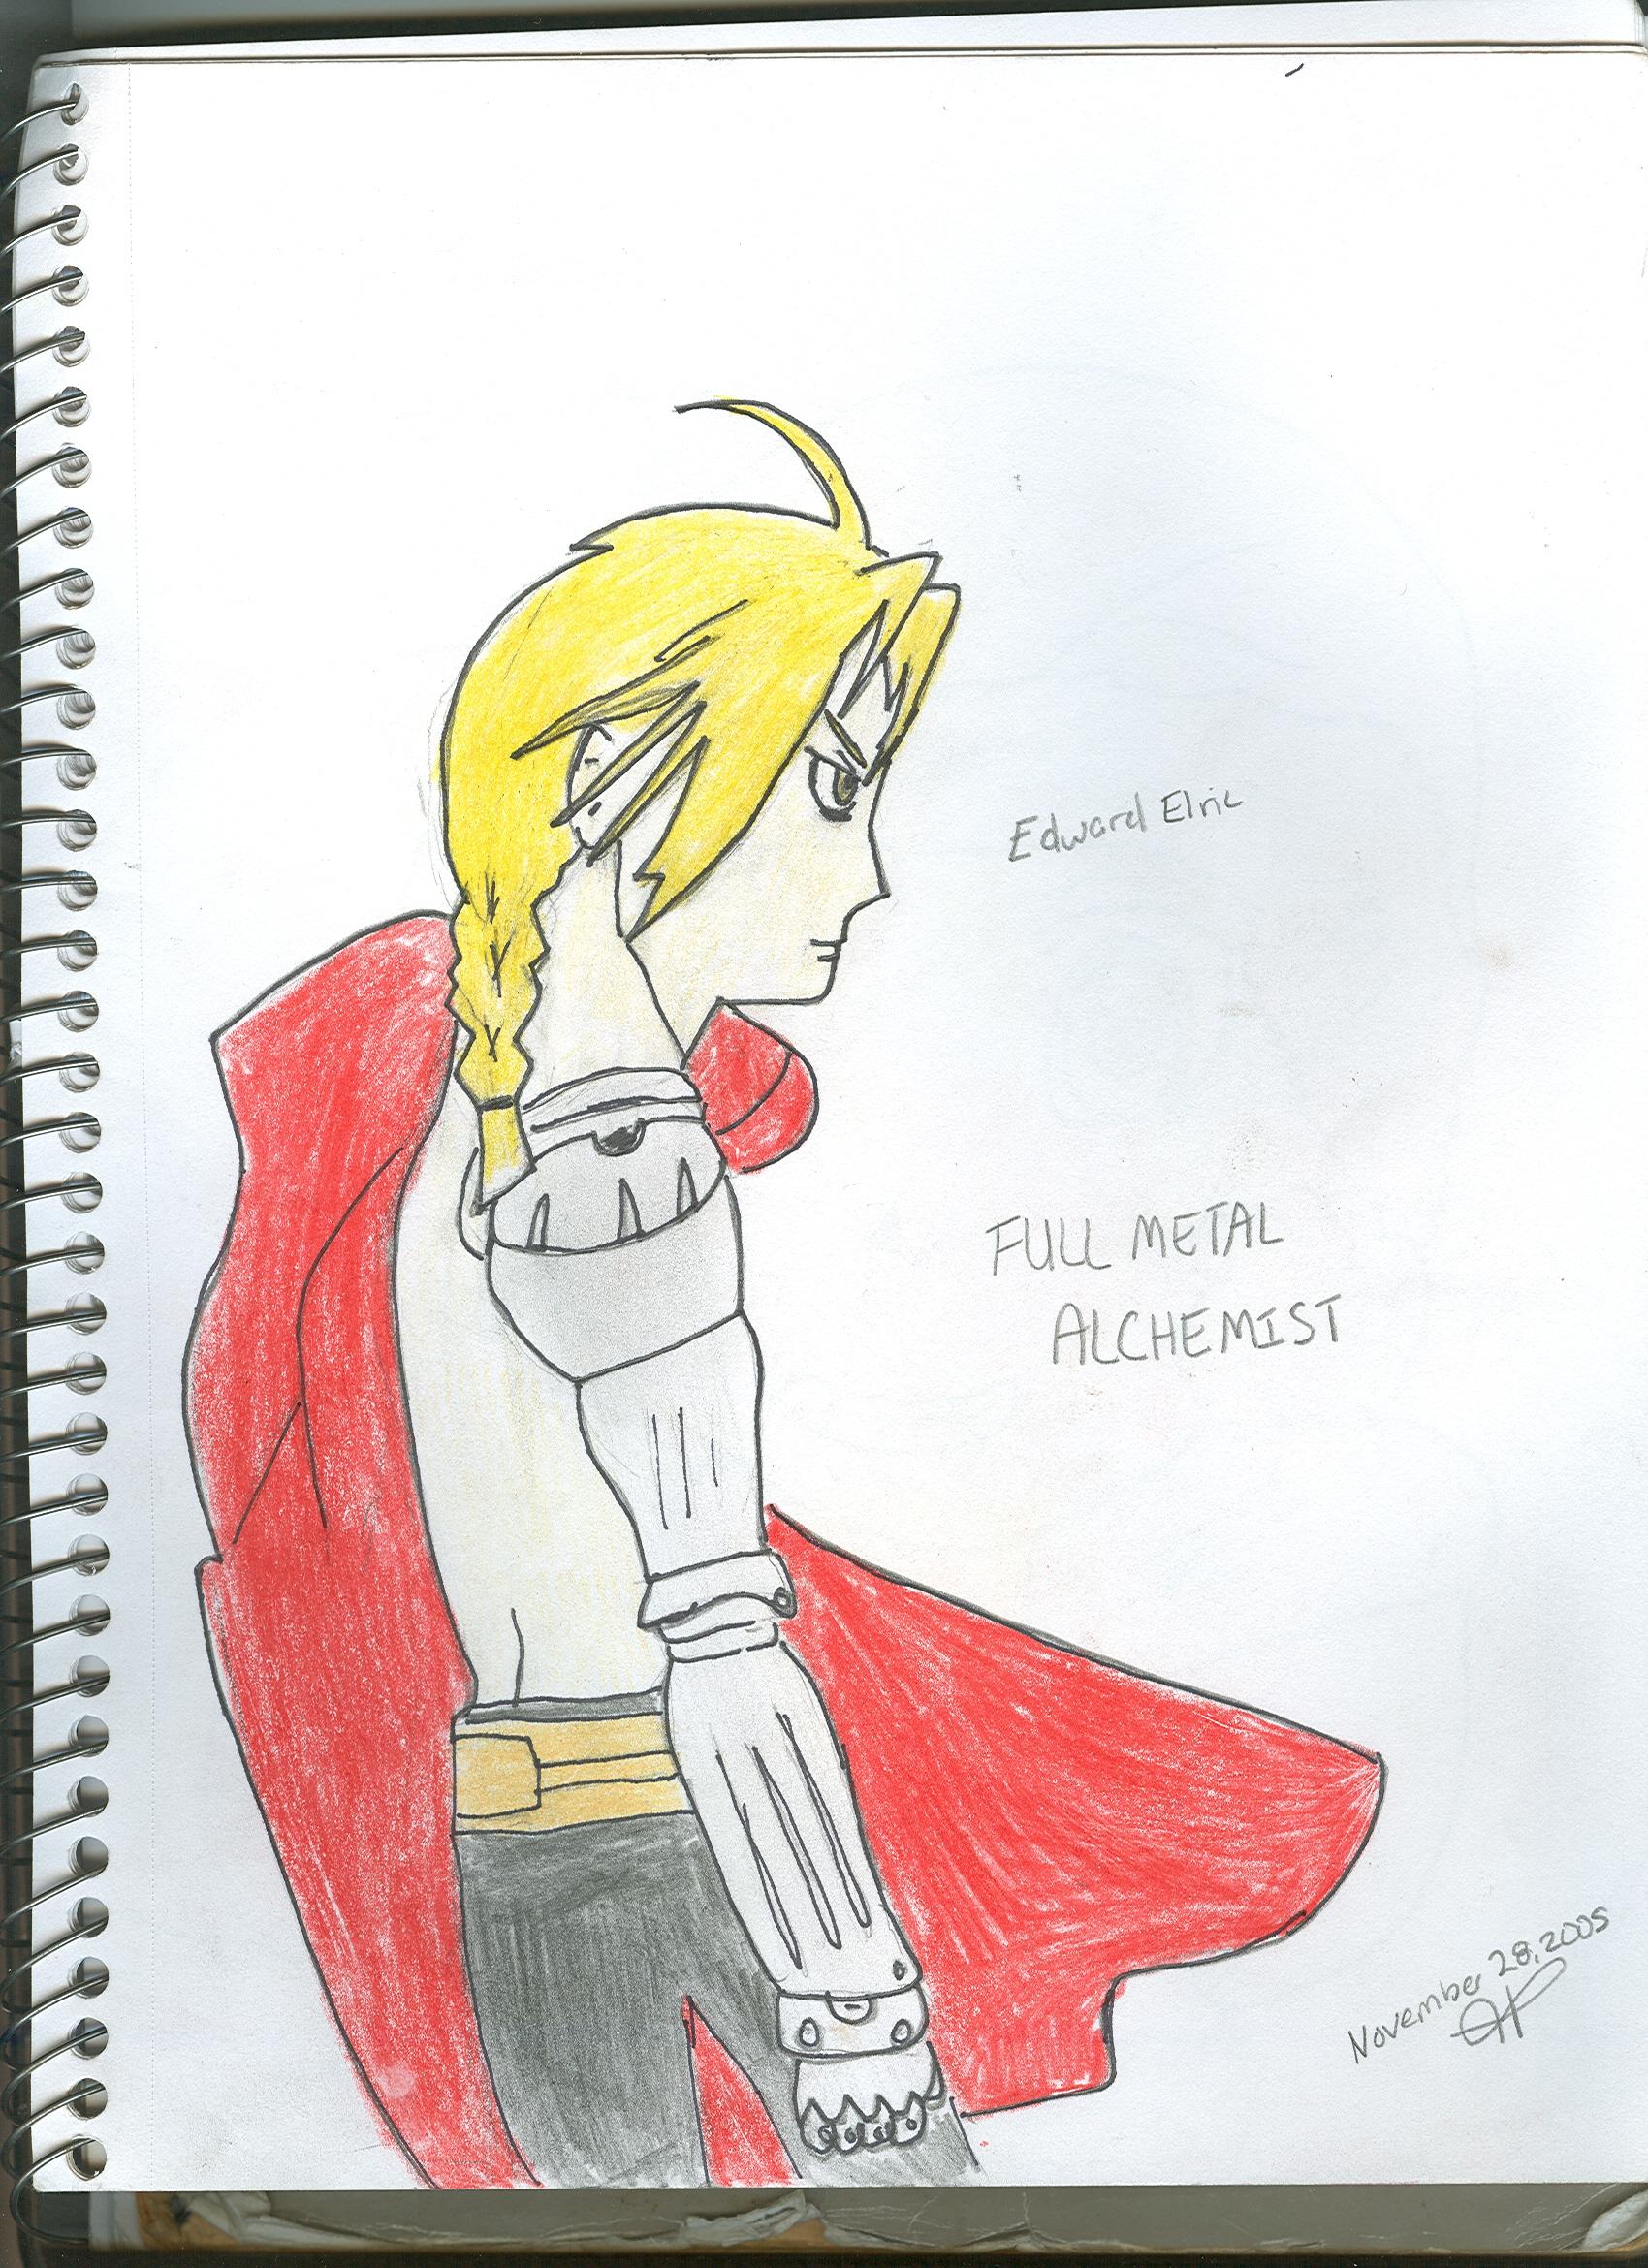 Edward sideview by Physco_Squirrel